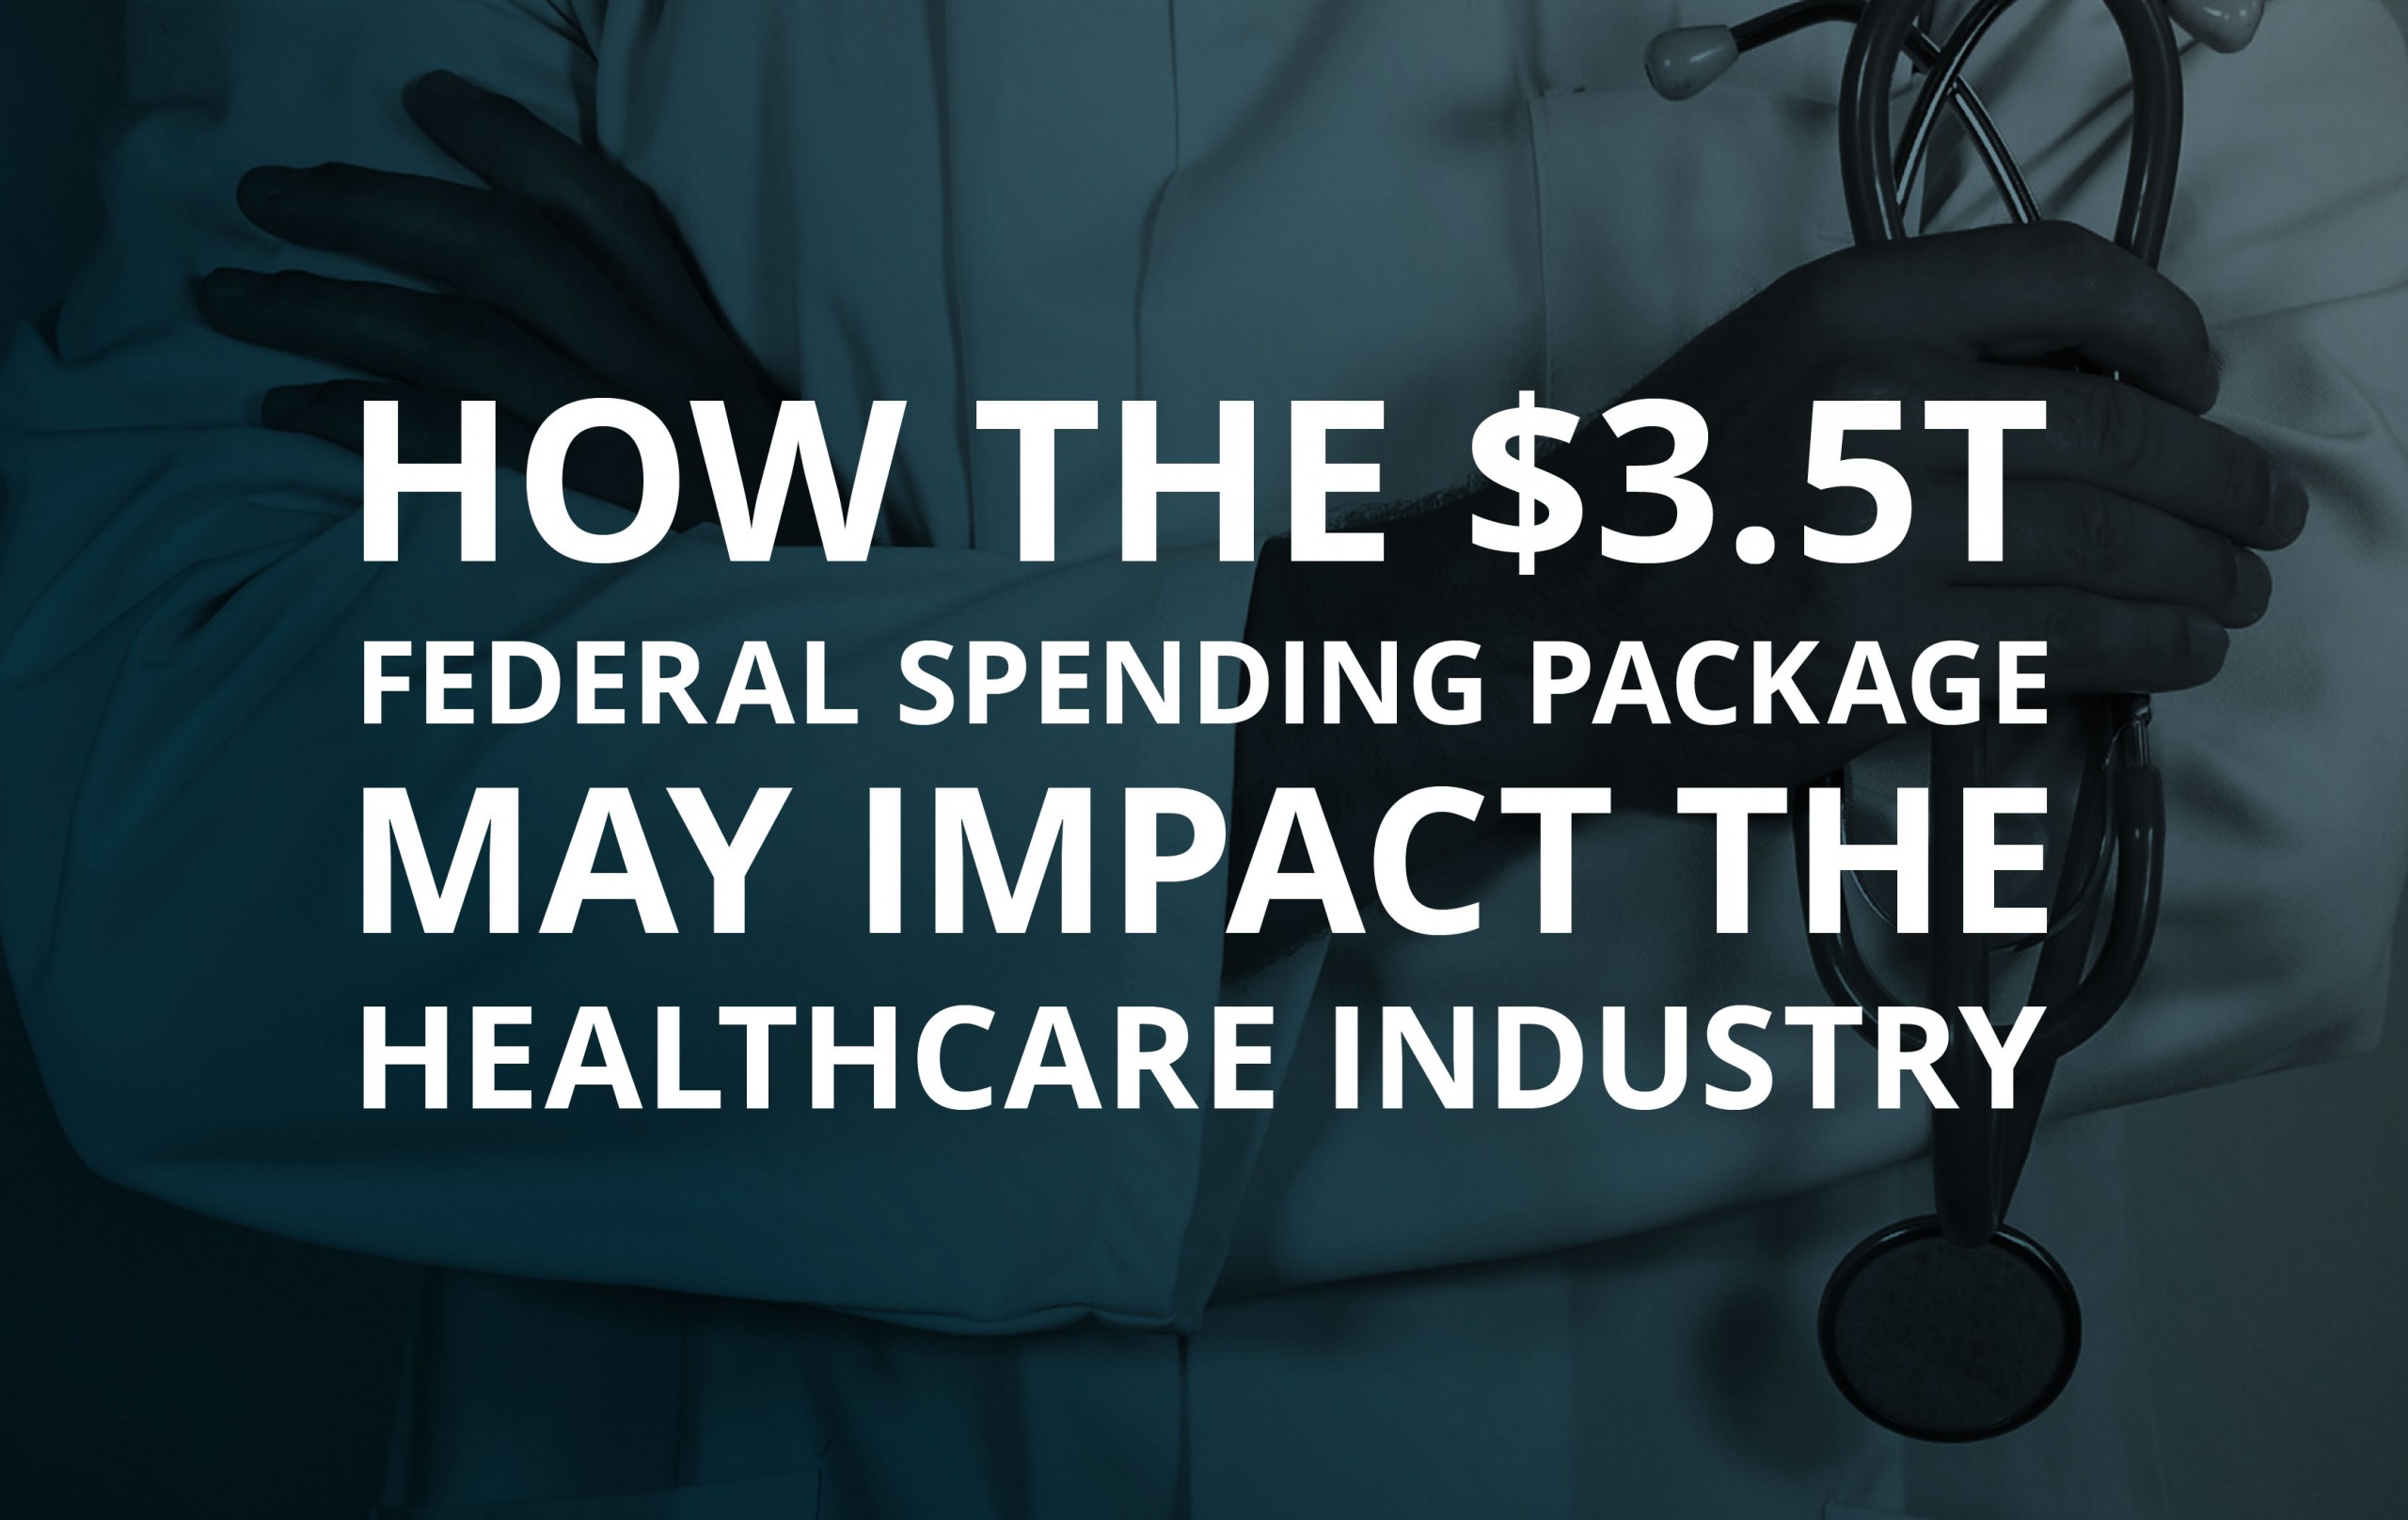 image for How the $3.5T Federal Spending Package May Impact the Healthcare Industry